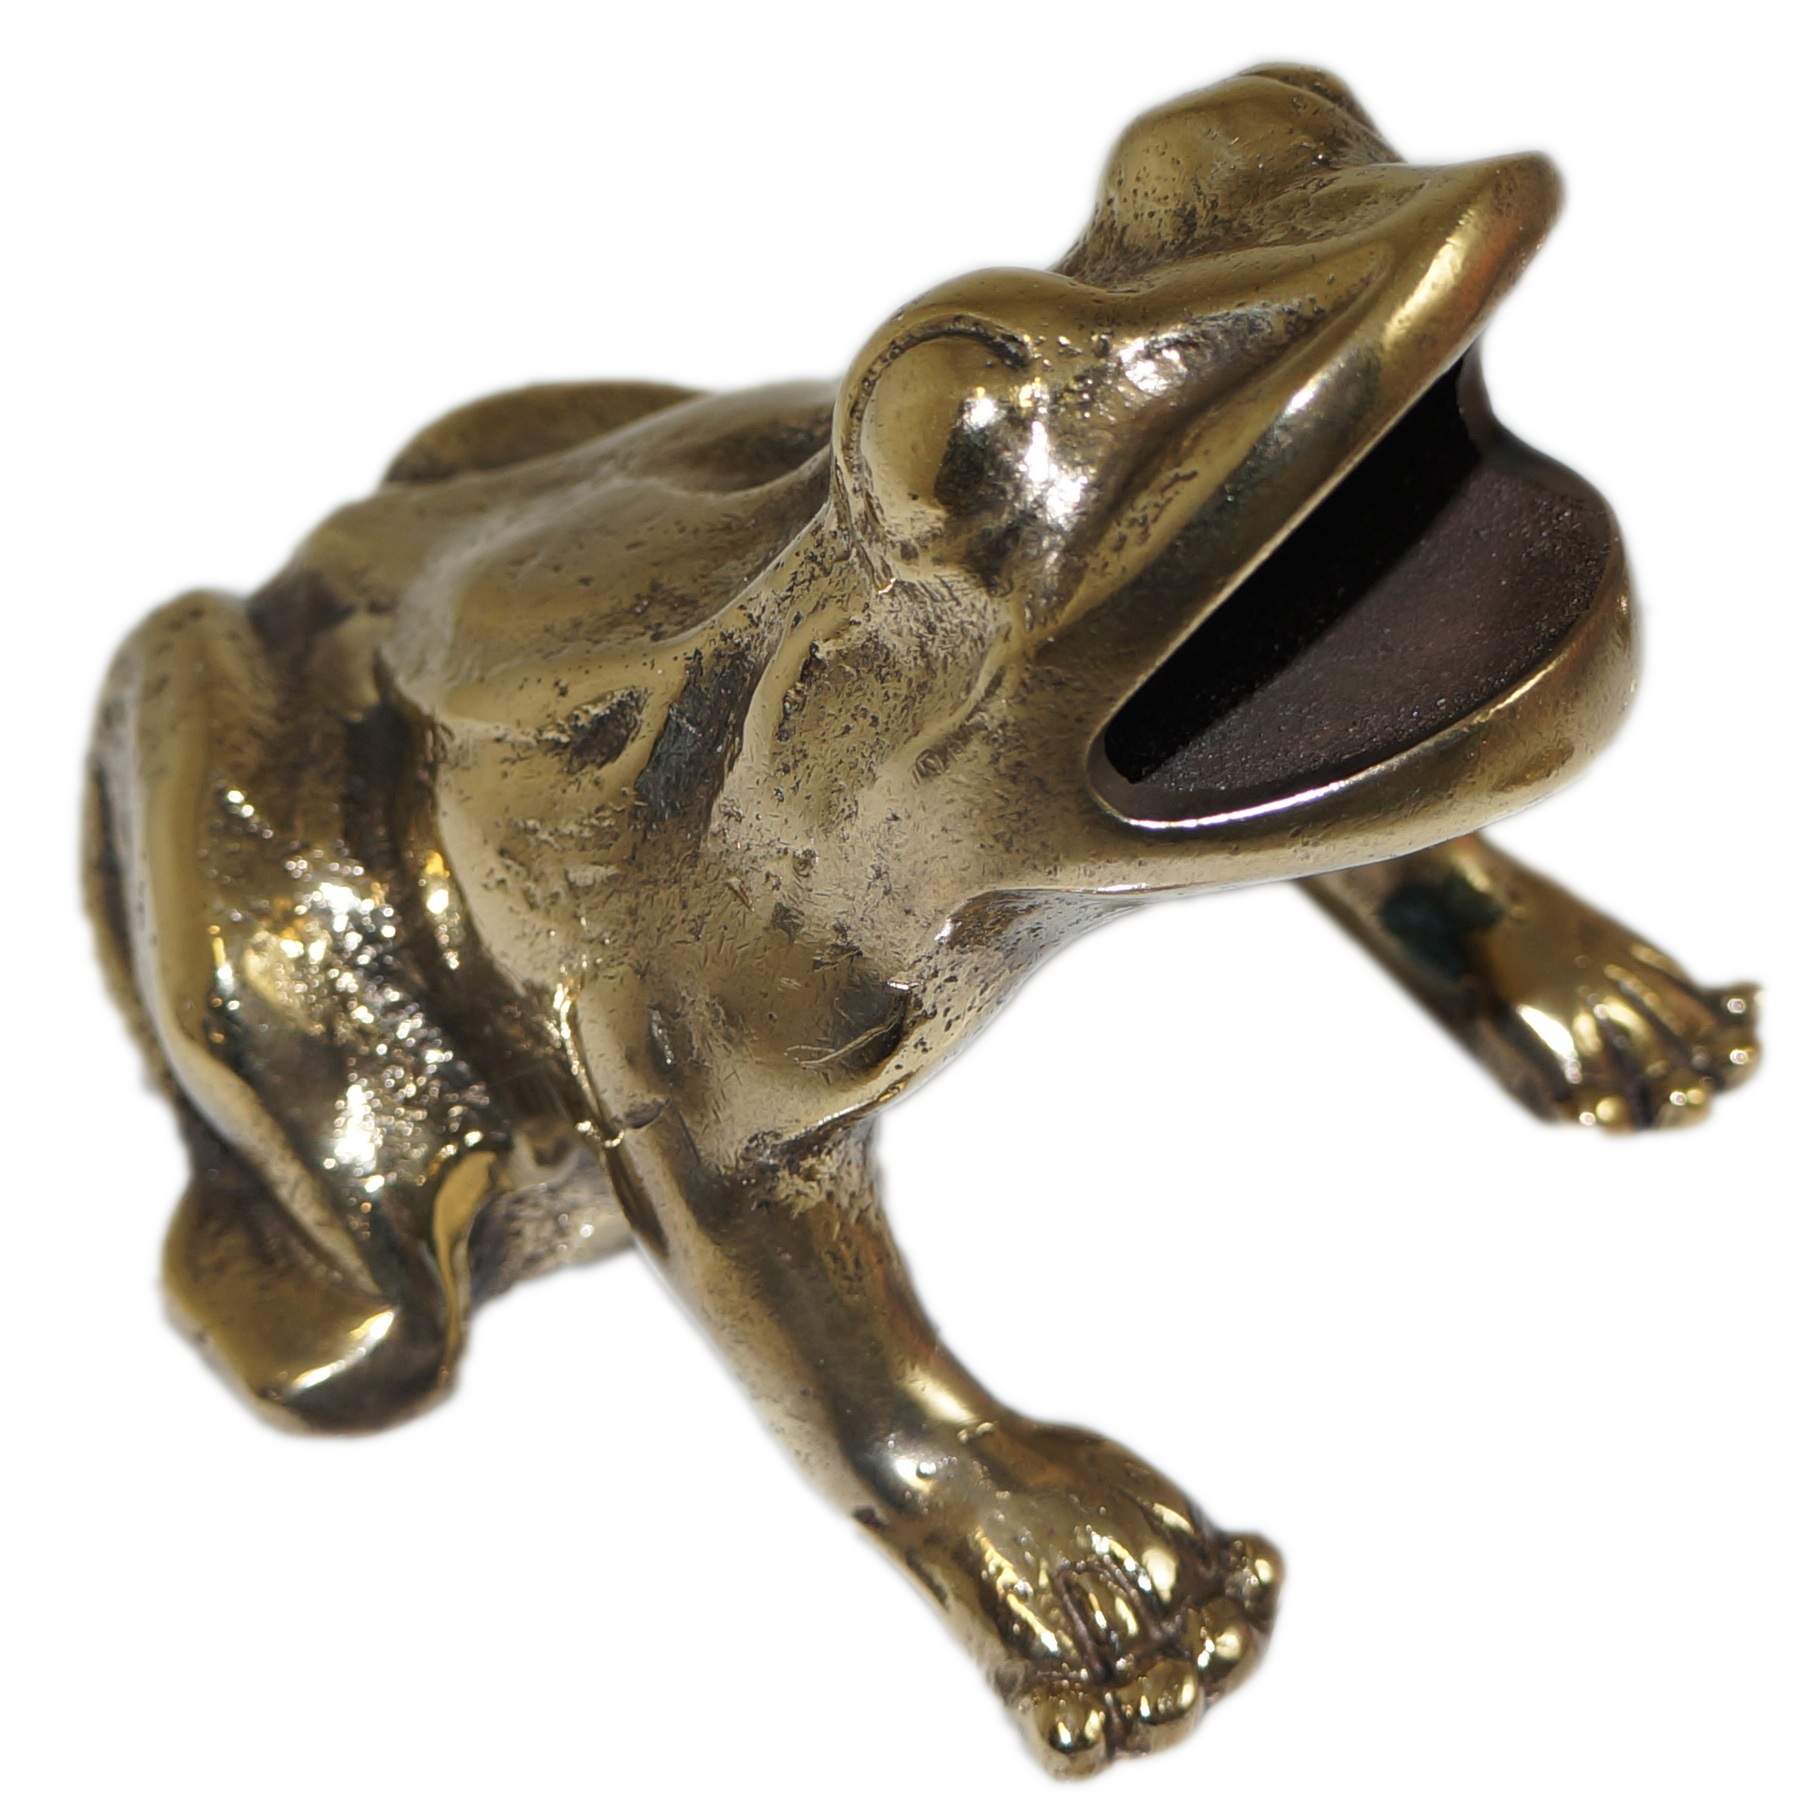 Frog basin spout in polished brass